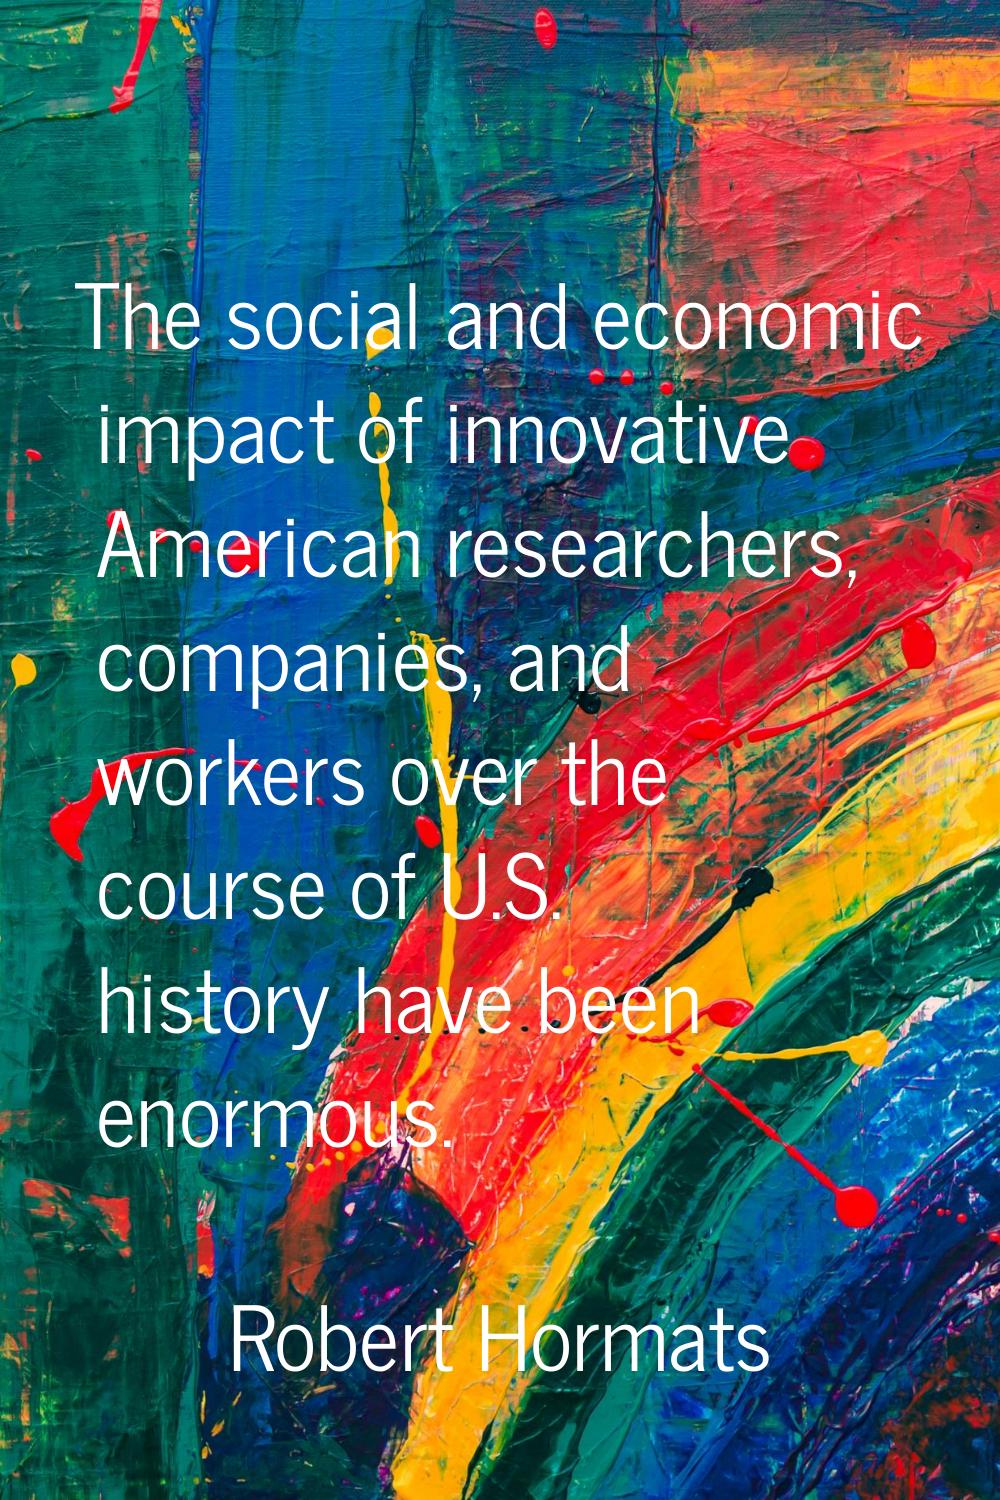 The social and economic impact of innovative American researchers, companies, and workers over the 